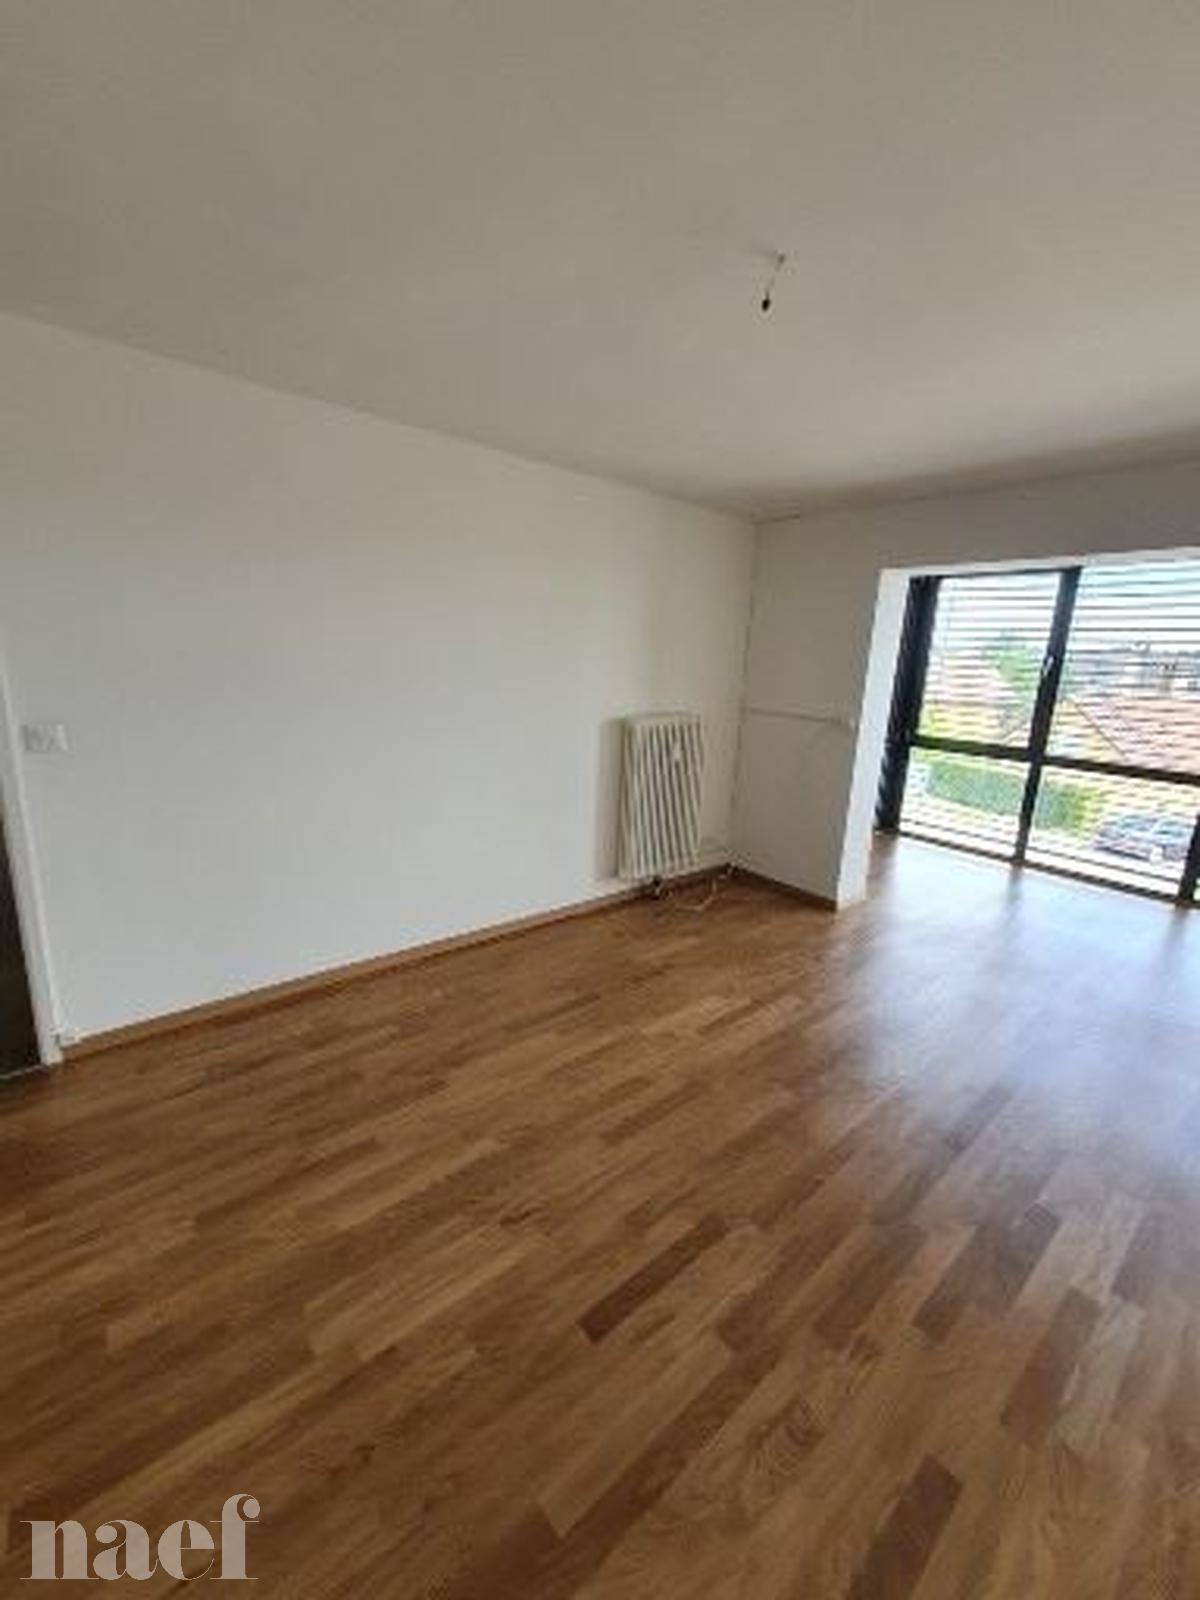 À louer : Appartement 3 Pieces Orbe - Ref : 204278.1003 | Naef Immobilier